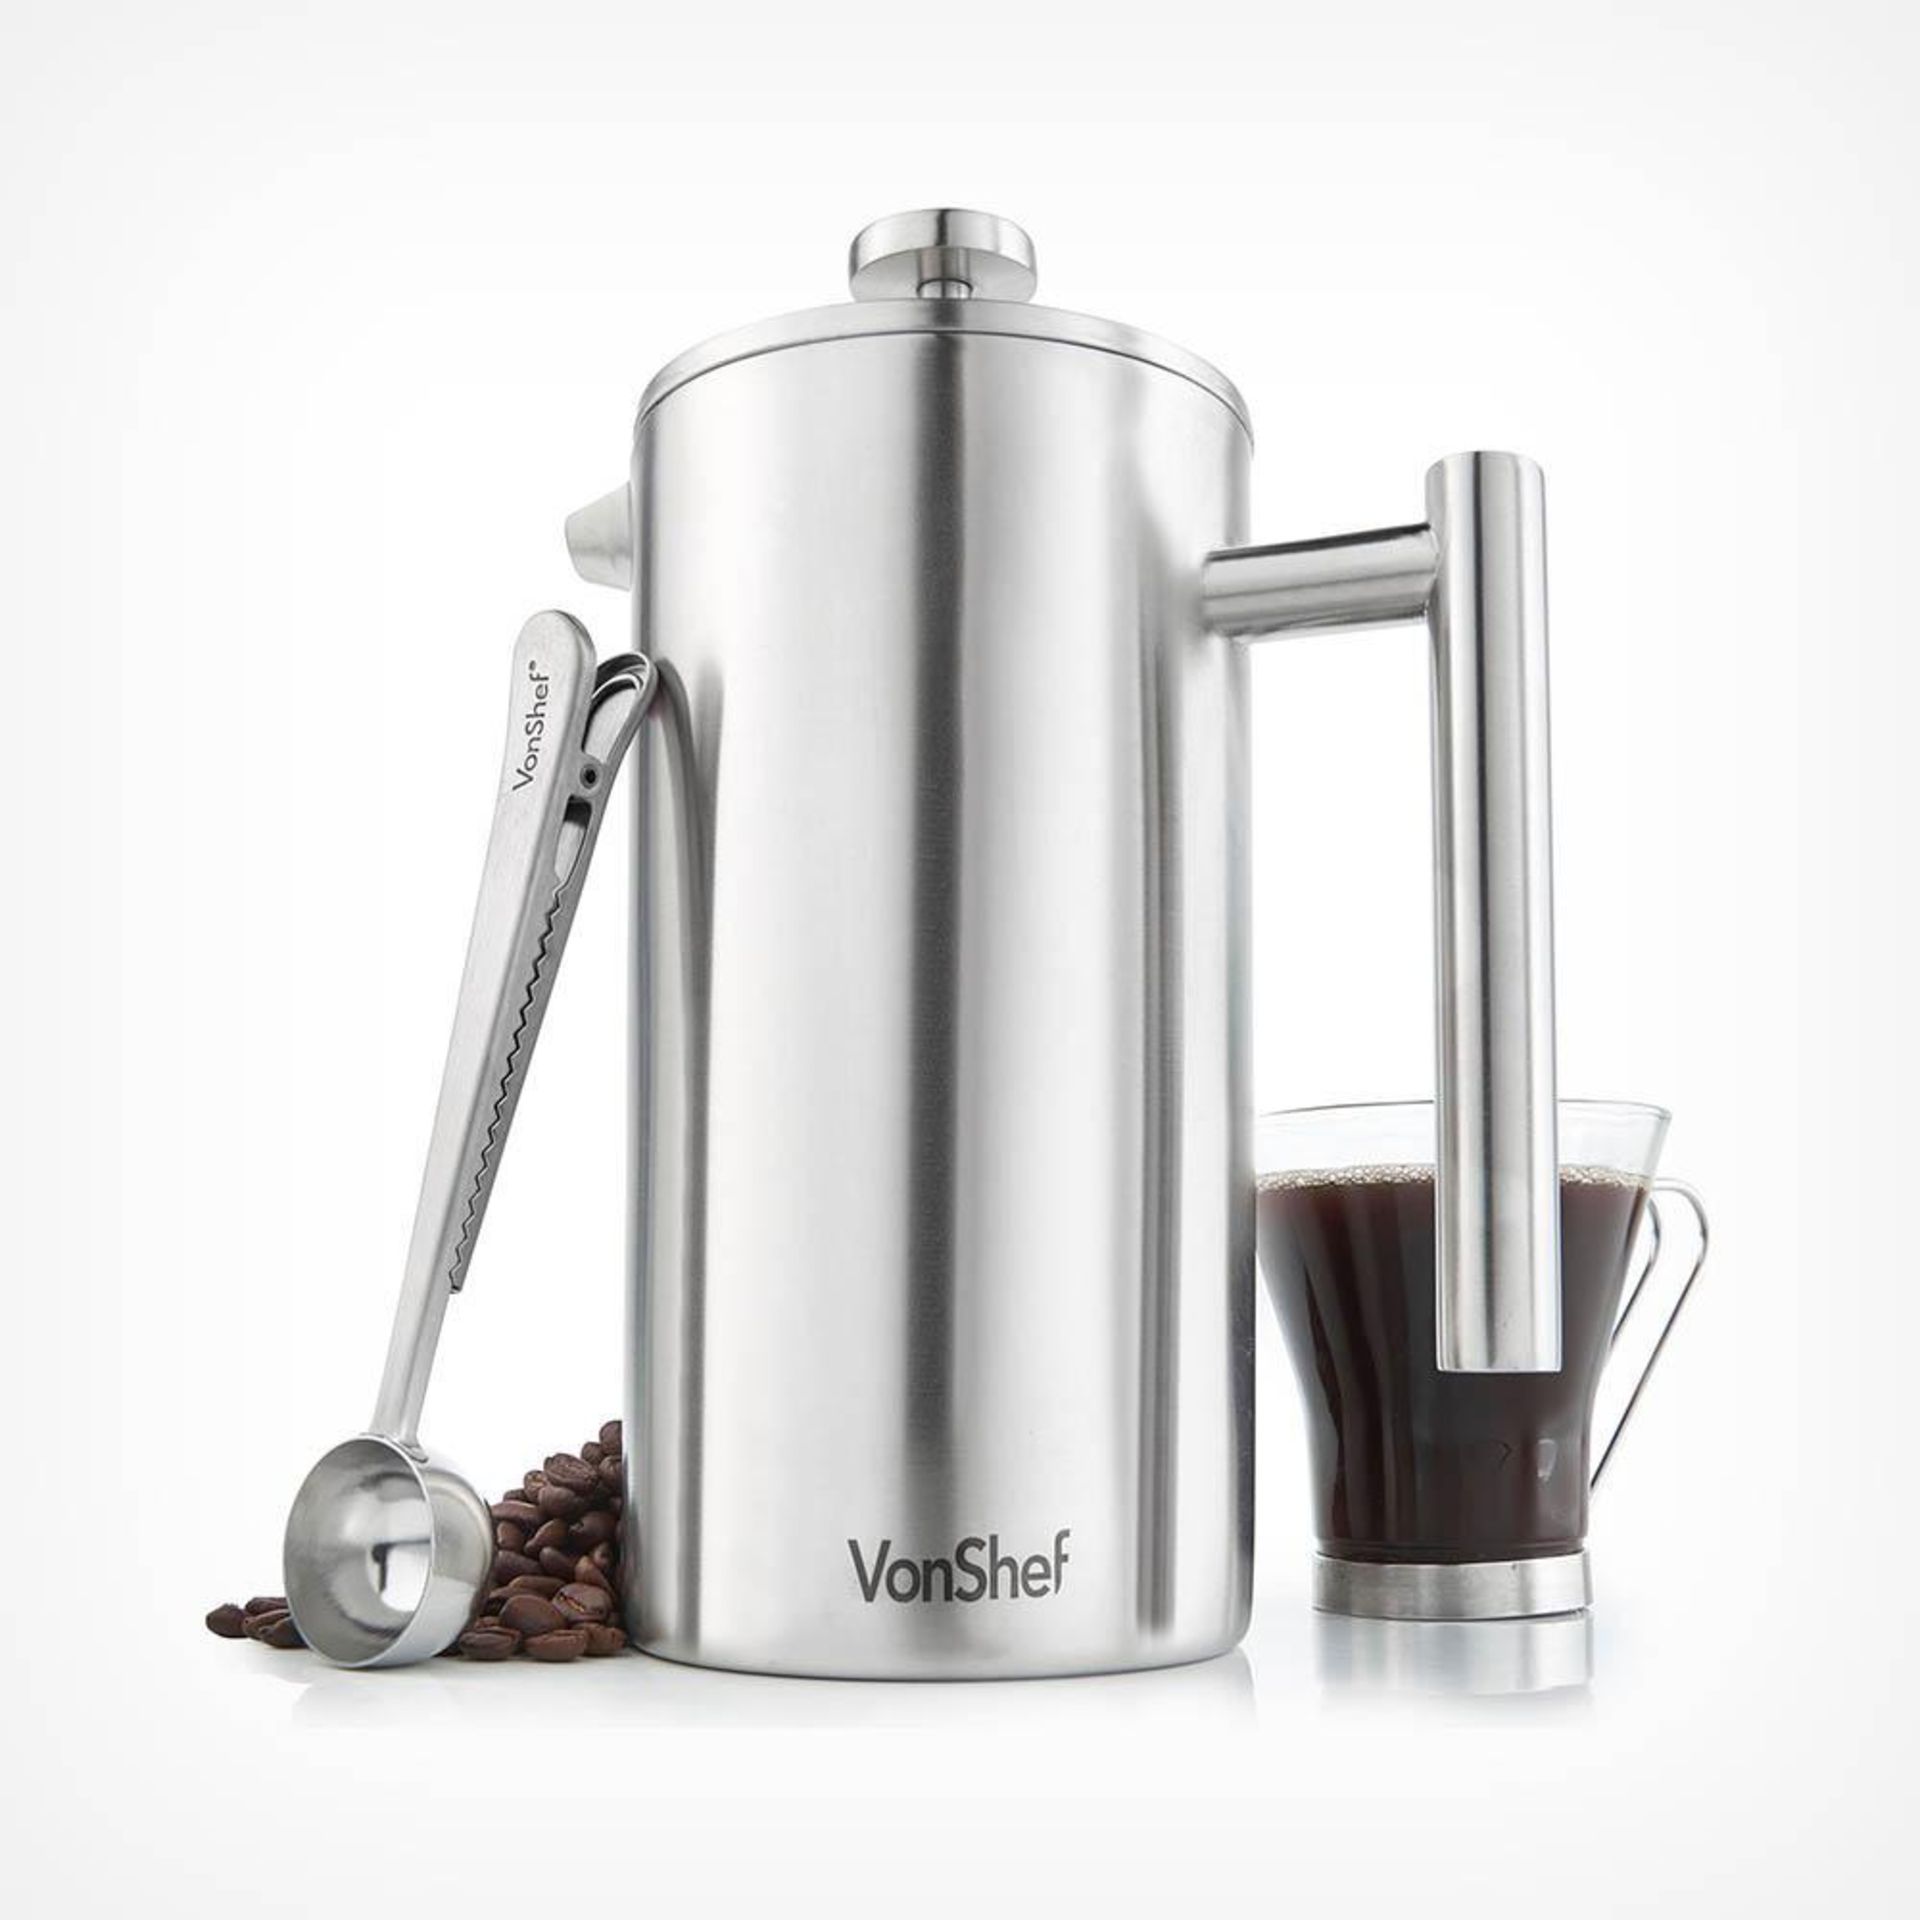 12 Cup Cafetiere with Spoon - PW. Wake up to the smell of freshly brewed coffee every morning with